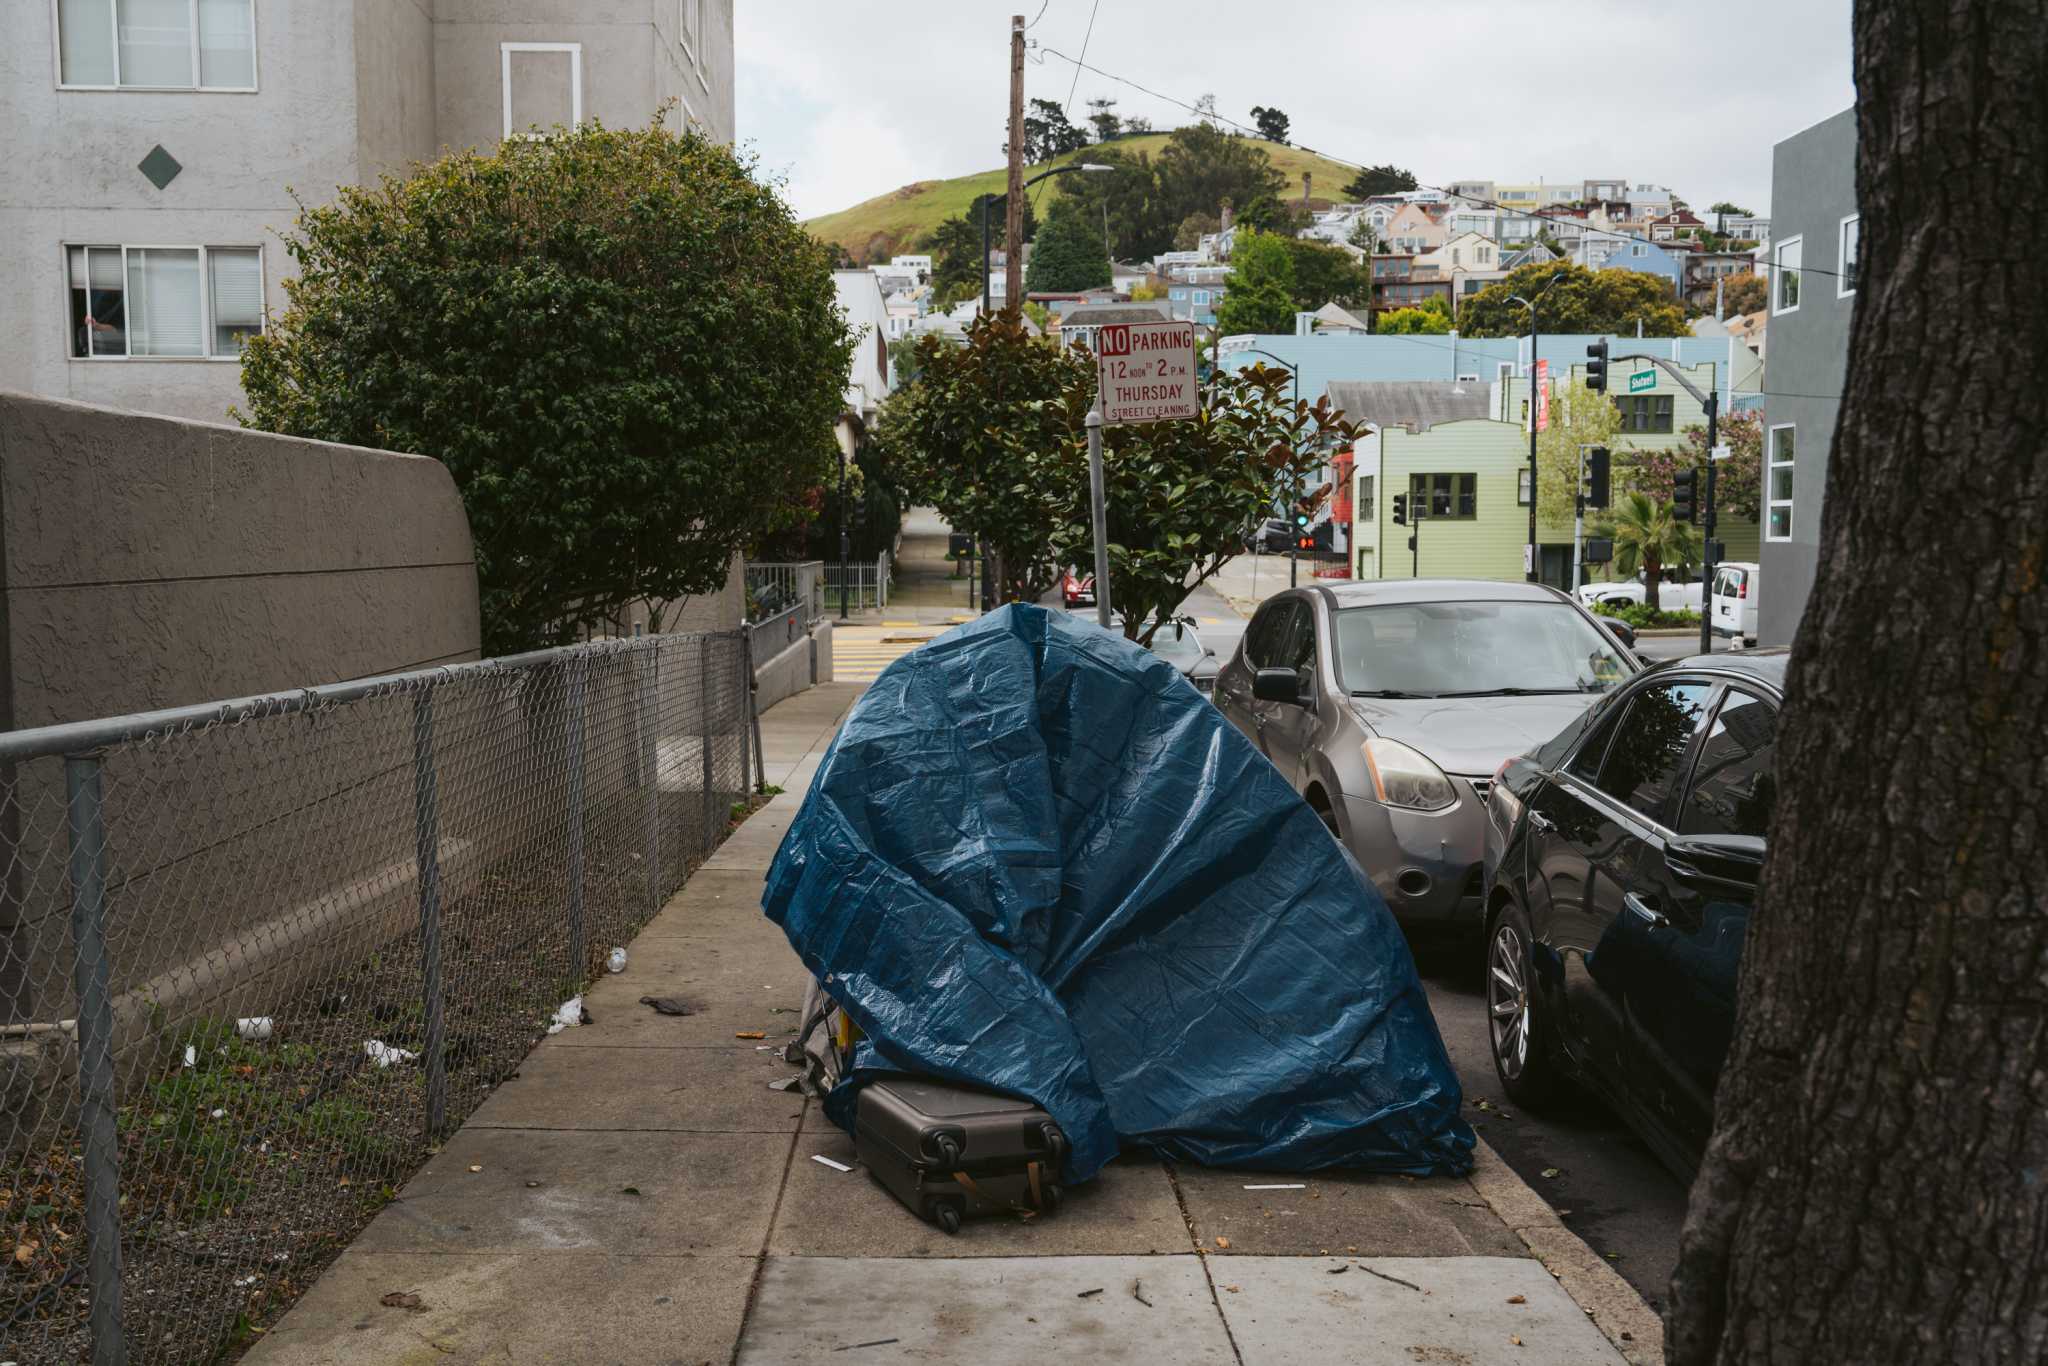 Who may now respond to SF 911 calls about homelessness